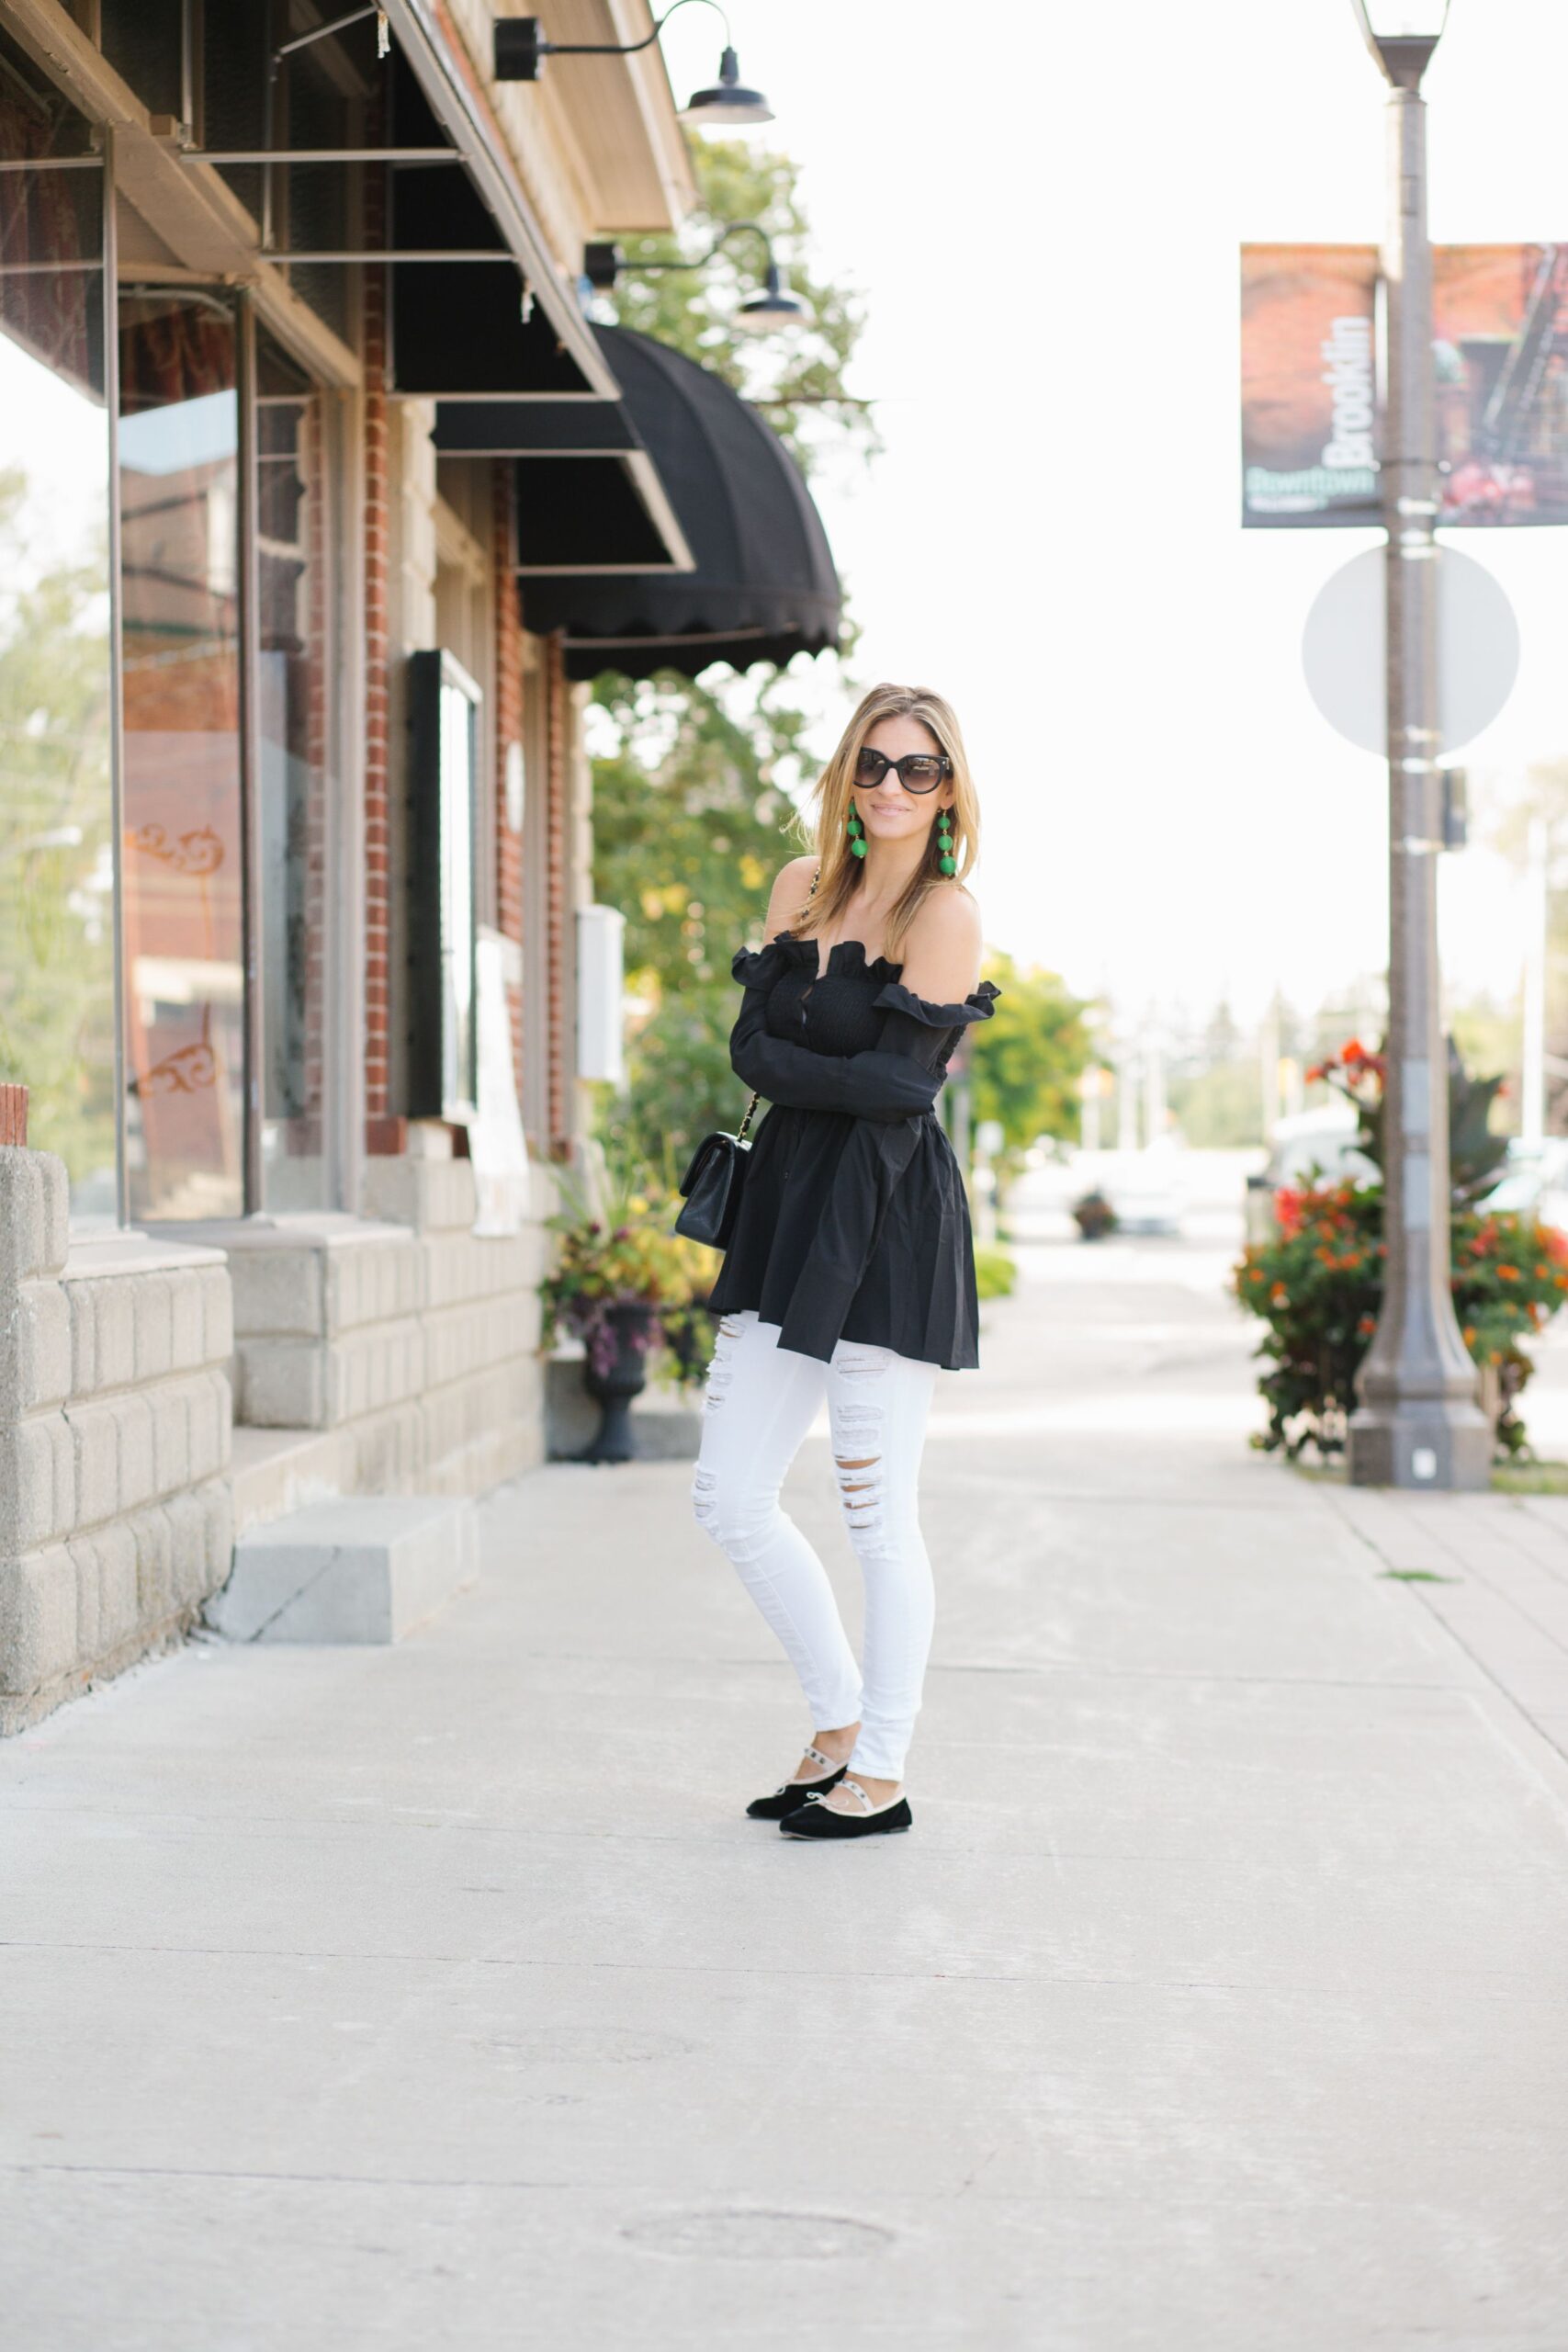 How to Wear White Ruffle Top